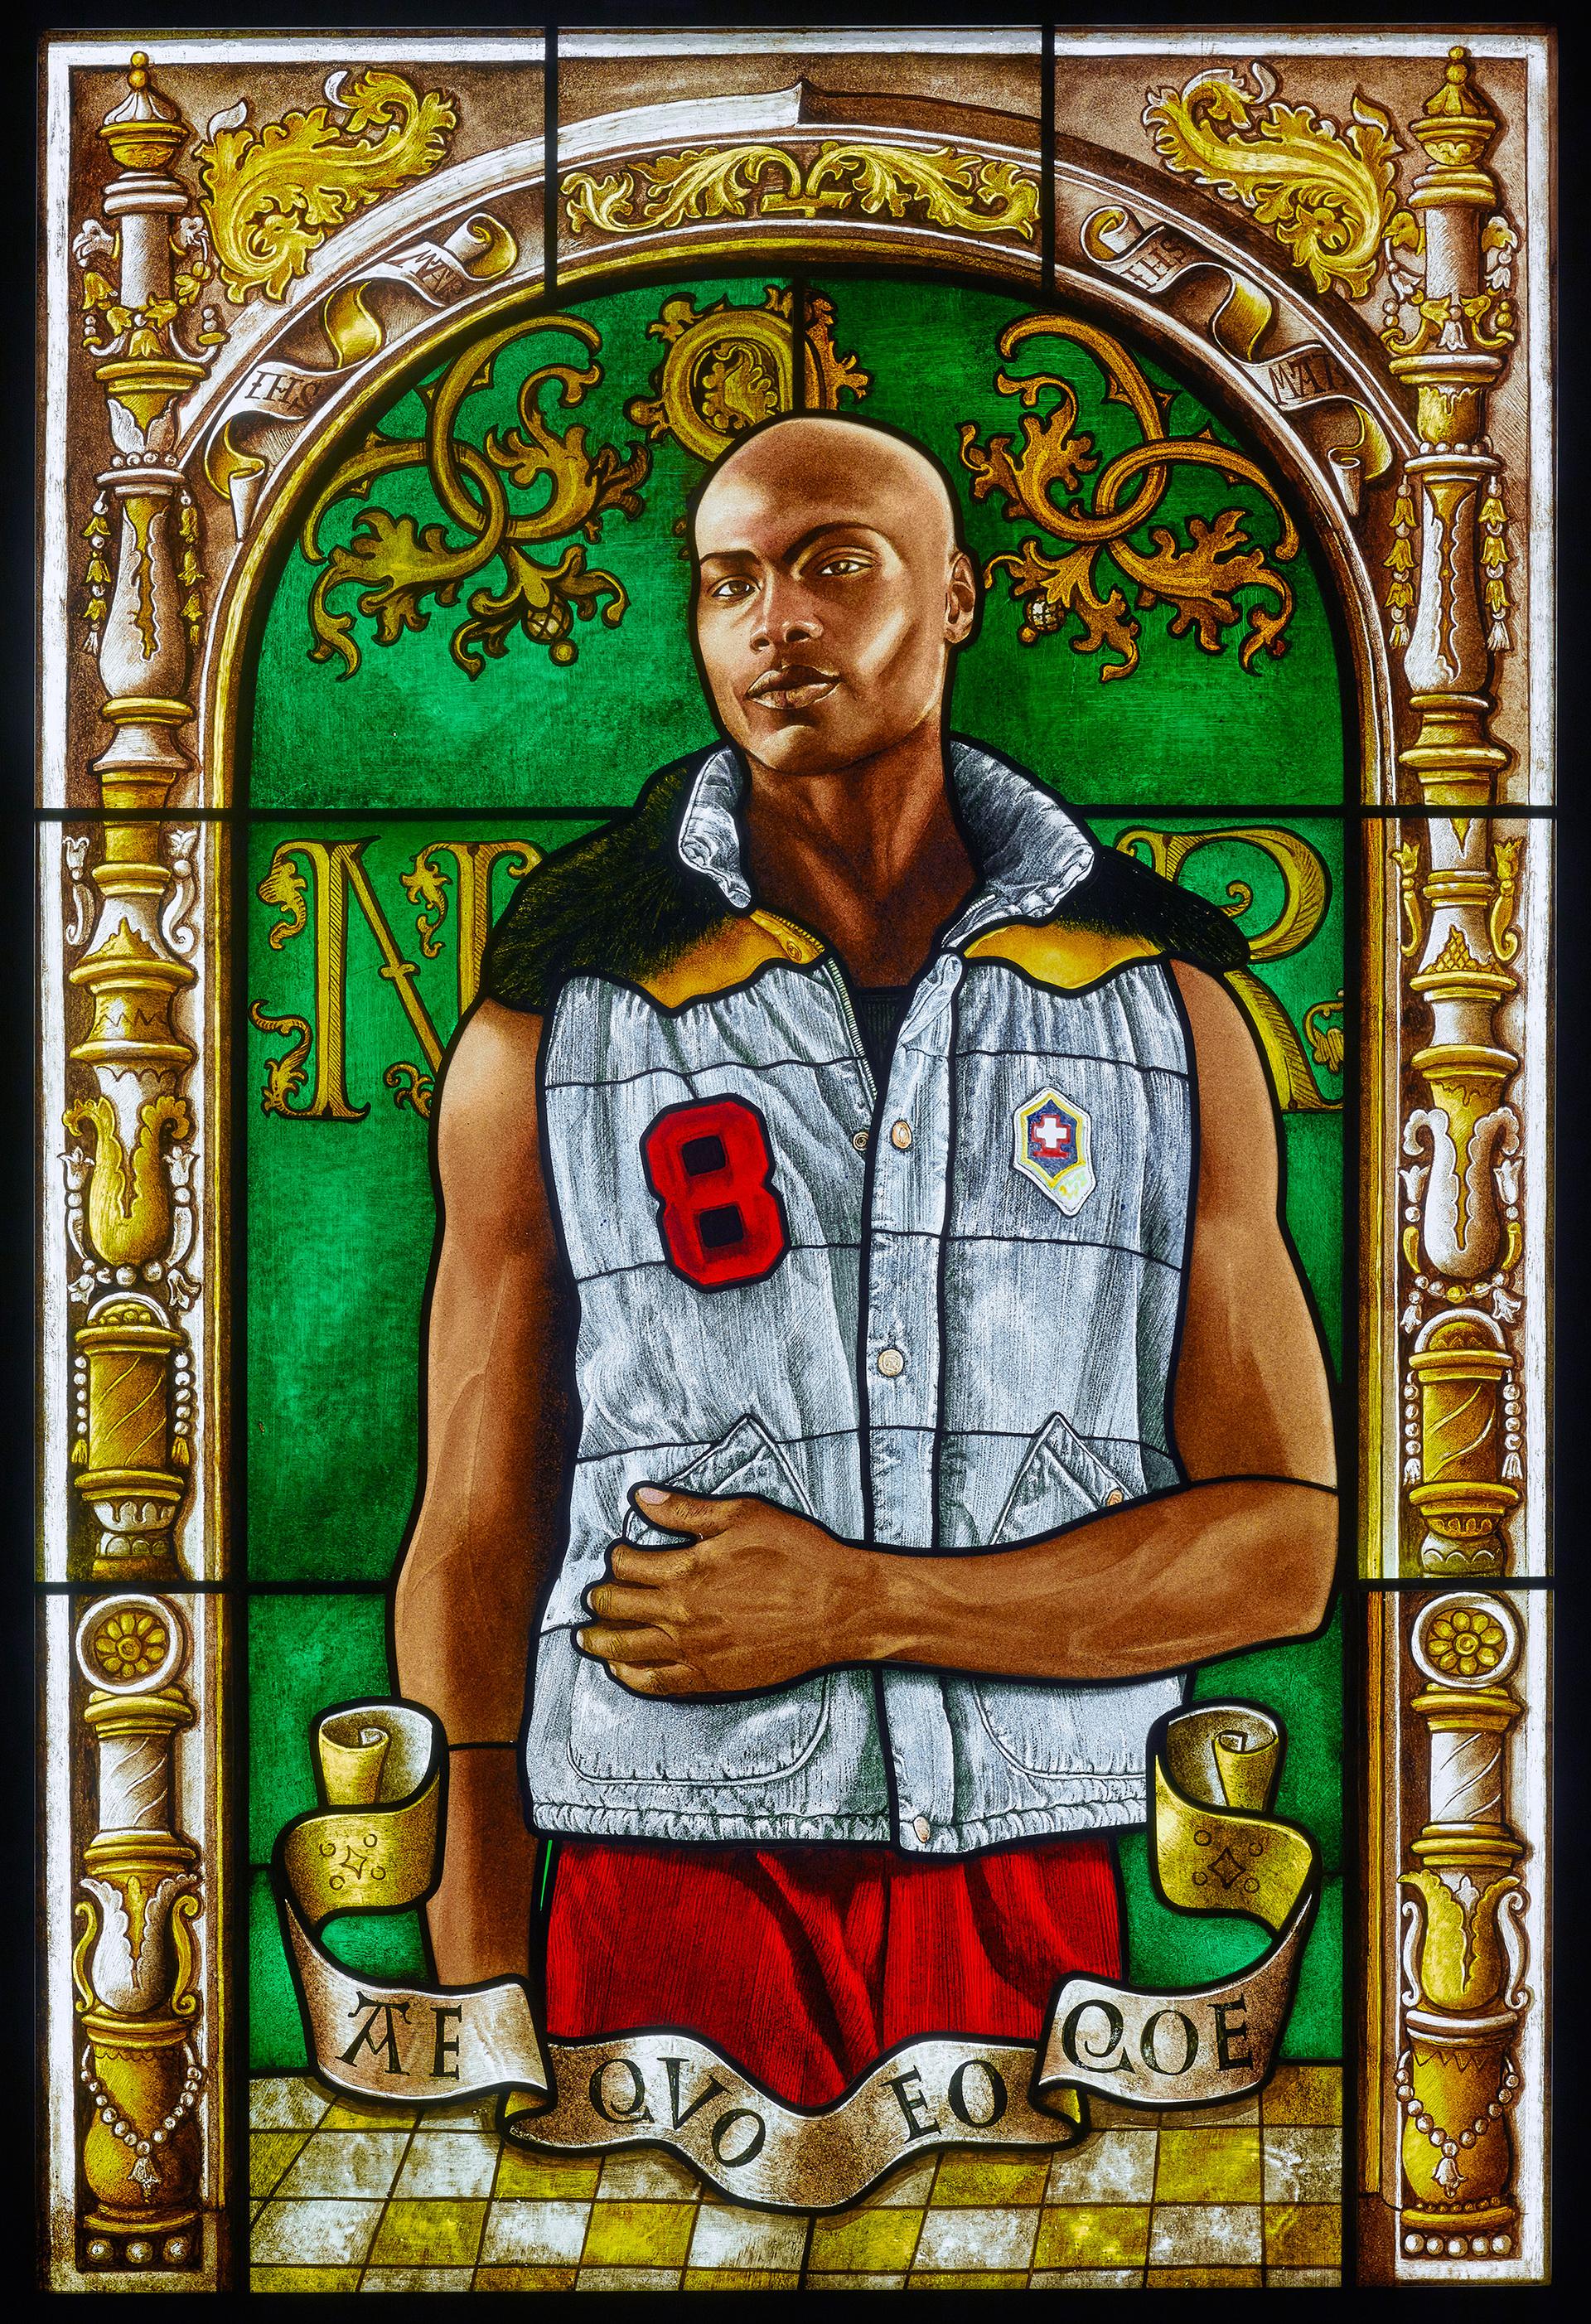 Arms of Nicolaas Ruterius, Bishop of Arras, stained glass portrait by Kehinde Wiley, 2014